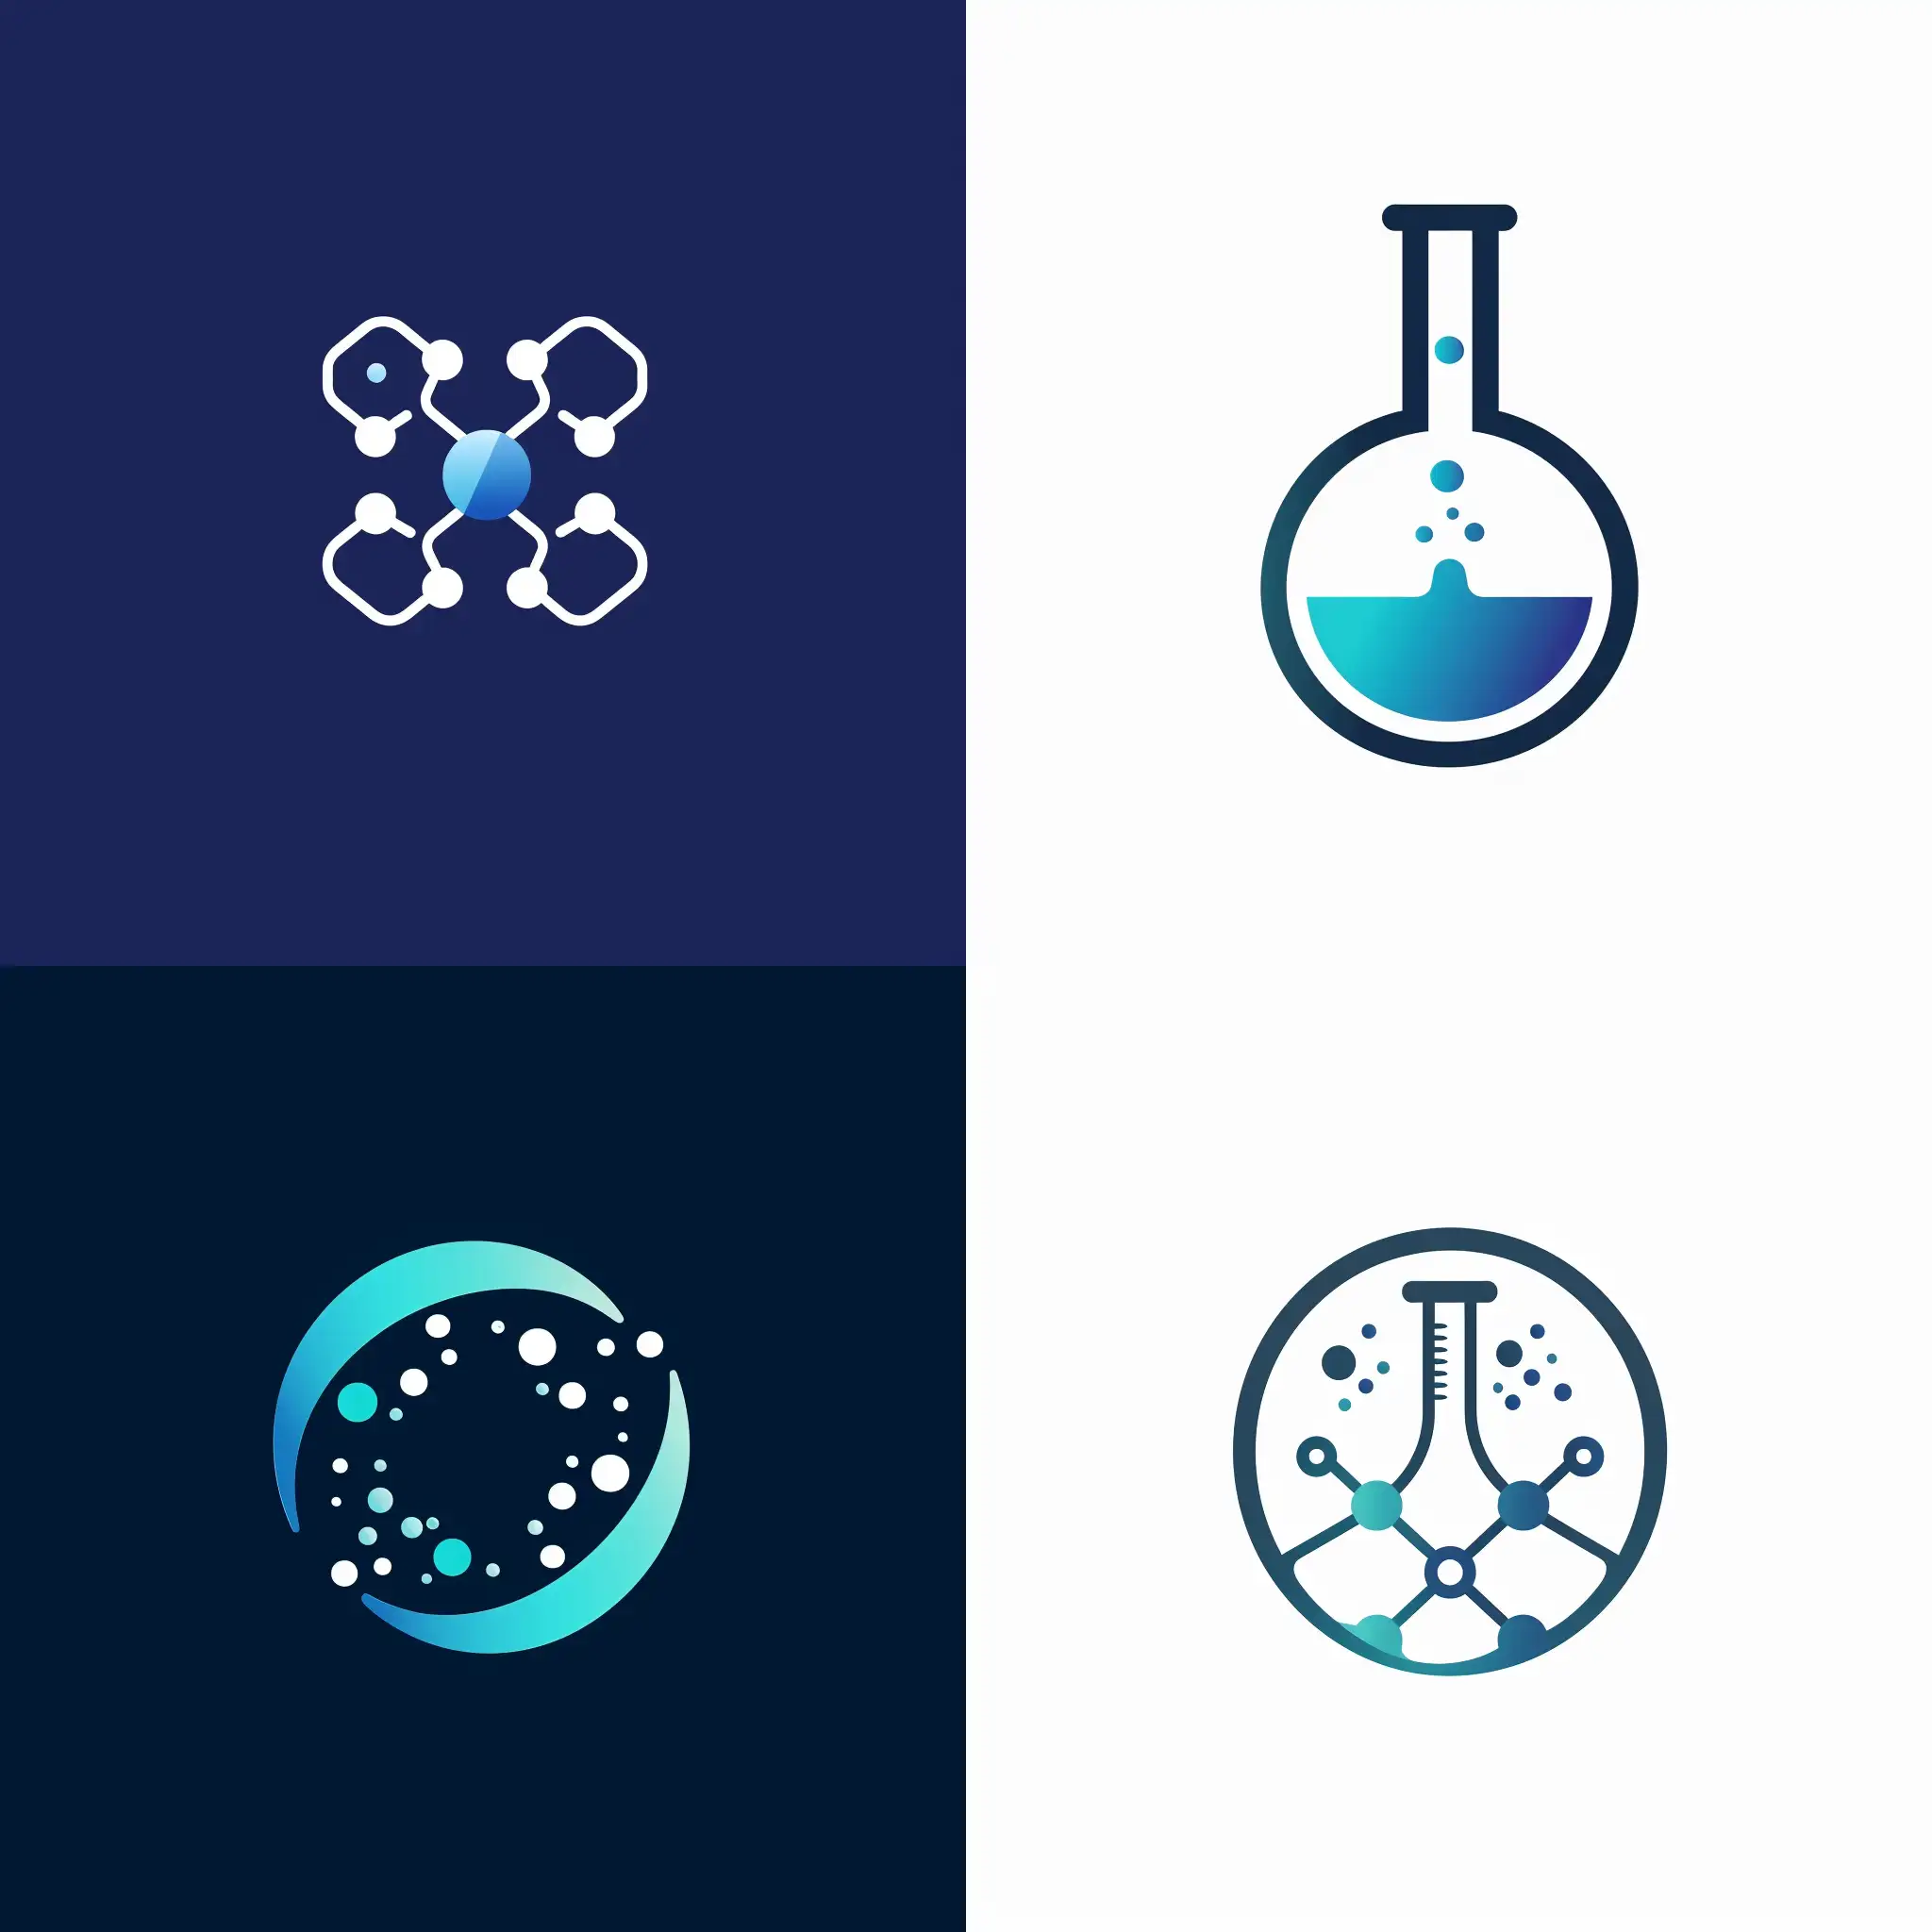 A minimalist professional logo for a biomedical scientist company who active in manufacturing biocompatible medical devices and drugs including hemostate and intravascular occluder